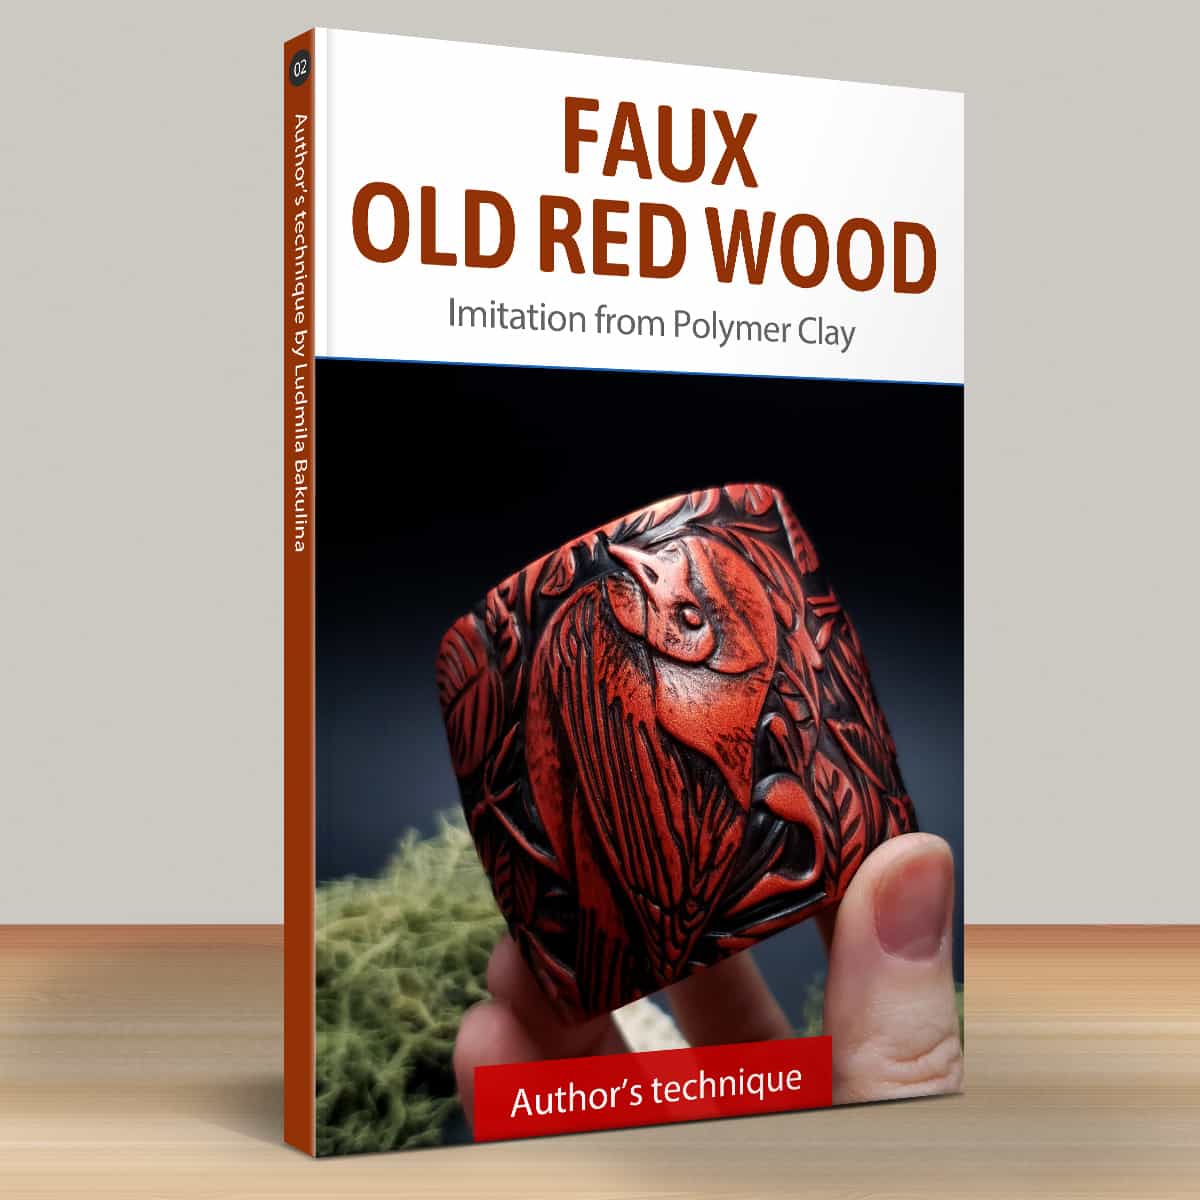 Faux materials - Part 2: Faux Old Red Wood (20843)